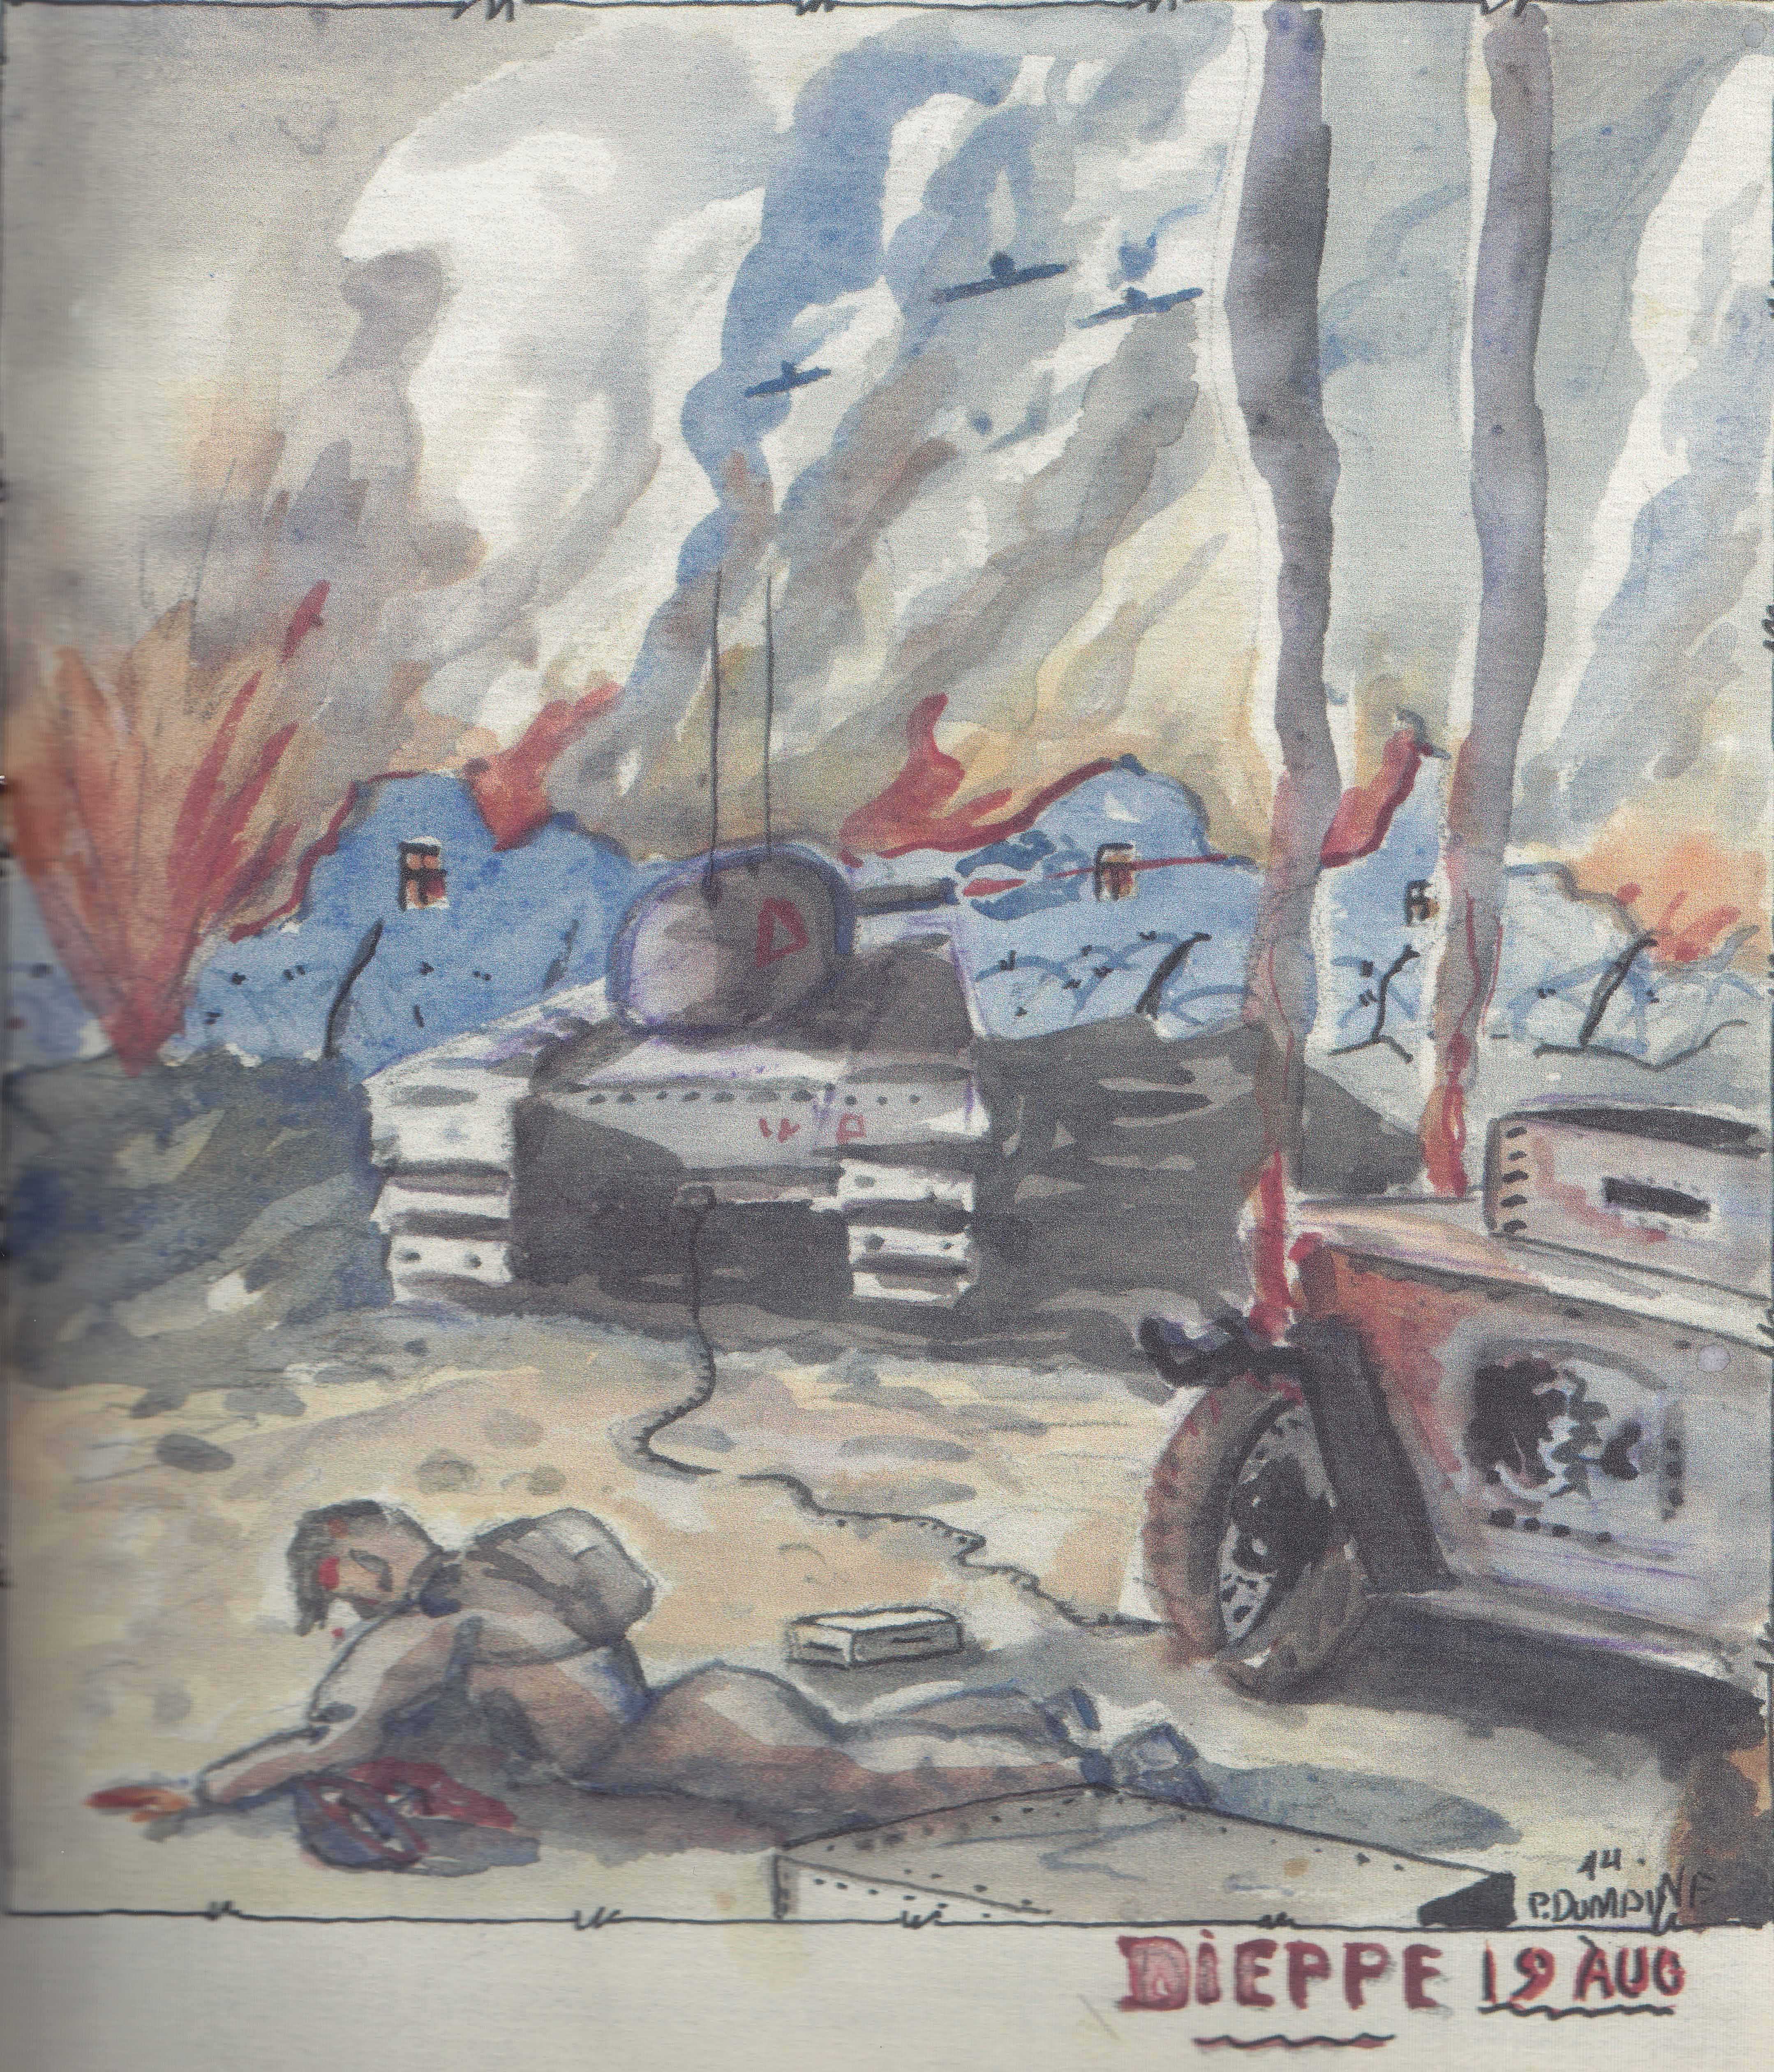 A colour sketch shows smoke in the distance, abandoned military vehicles including tanks, and a bloody soldier laying in the foreground. Explosions are shown. It is signed and dated "P. Dumaine, Dieppe, 19 Aug."